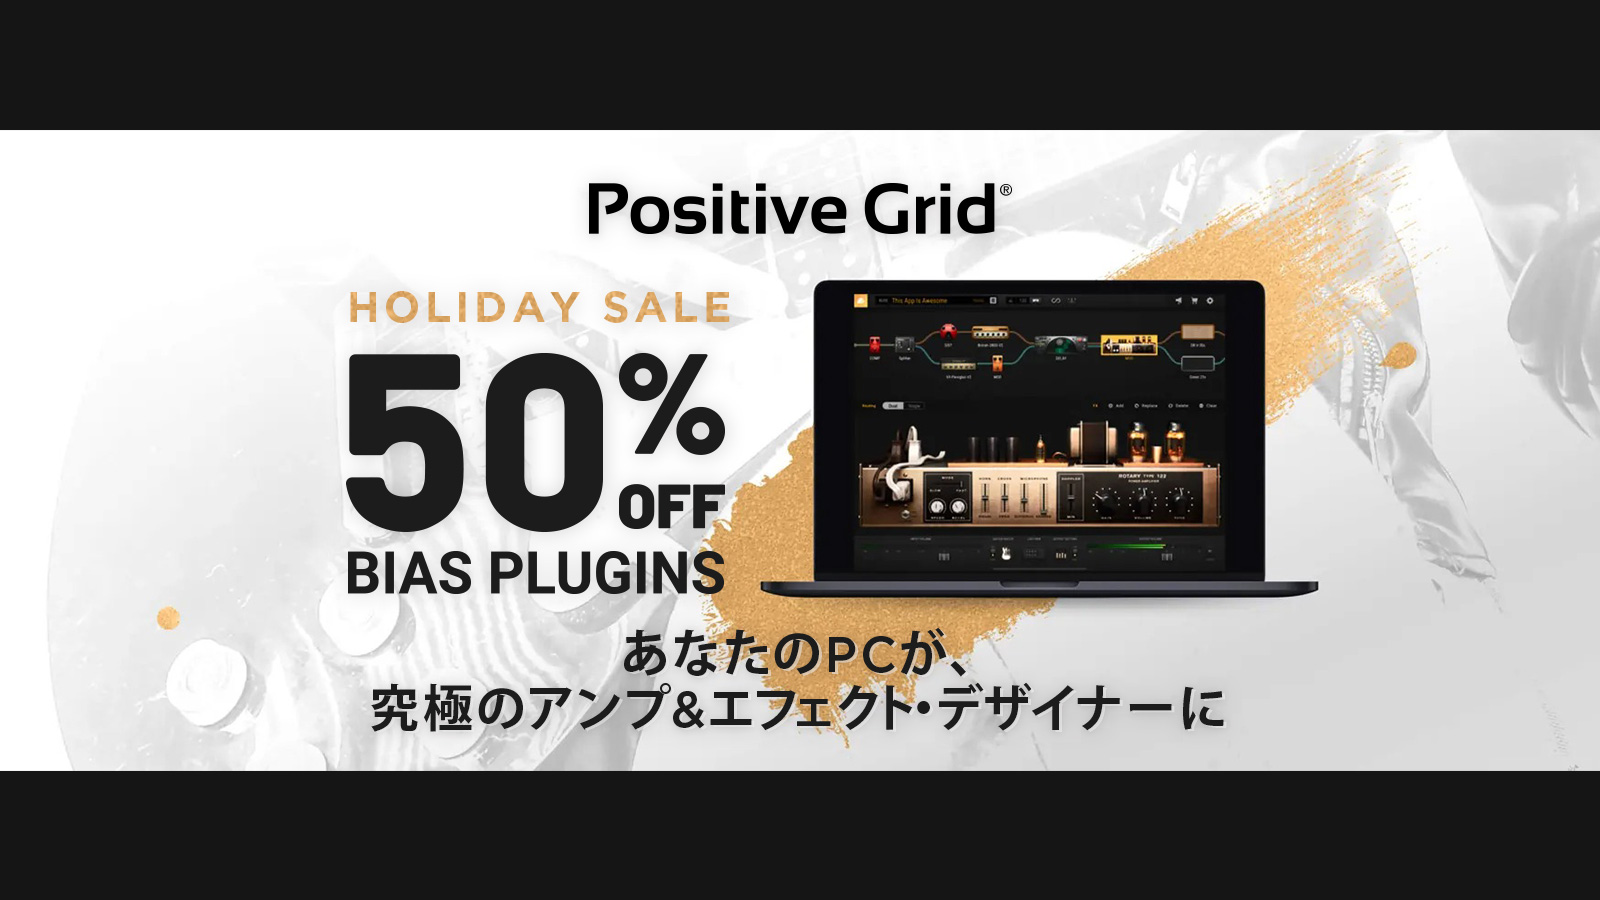 Positive Grid Holiday Software Promotion!